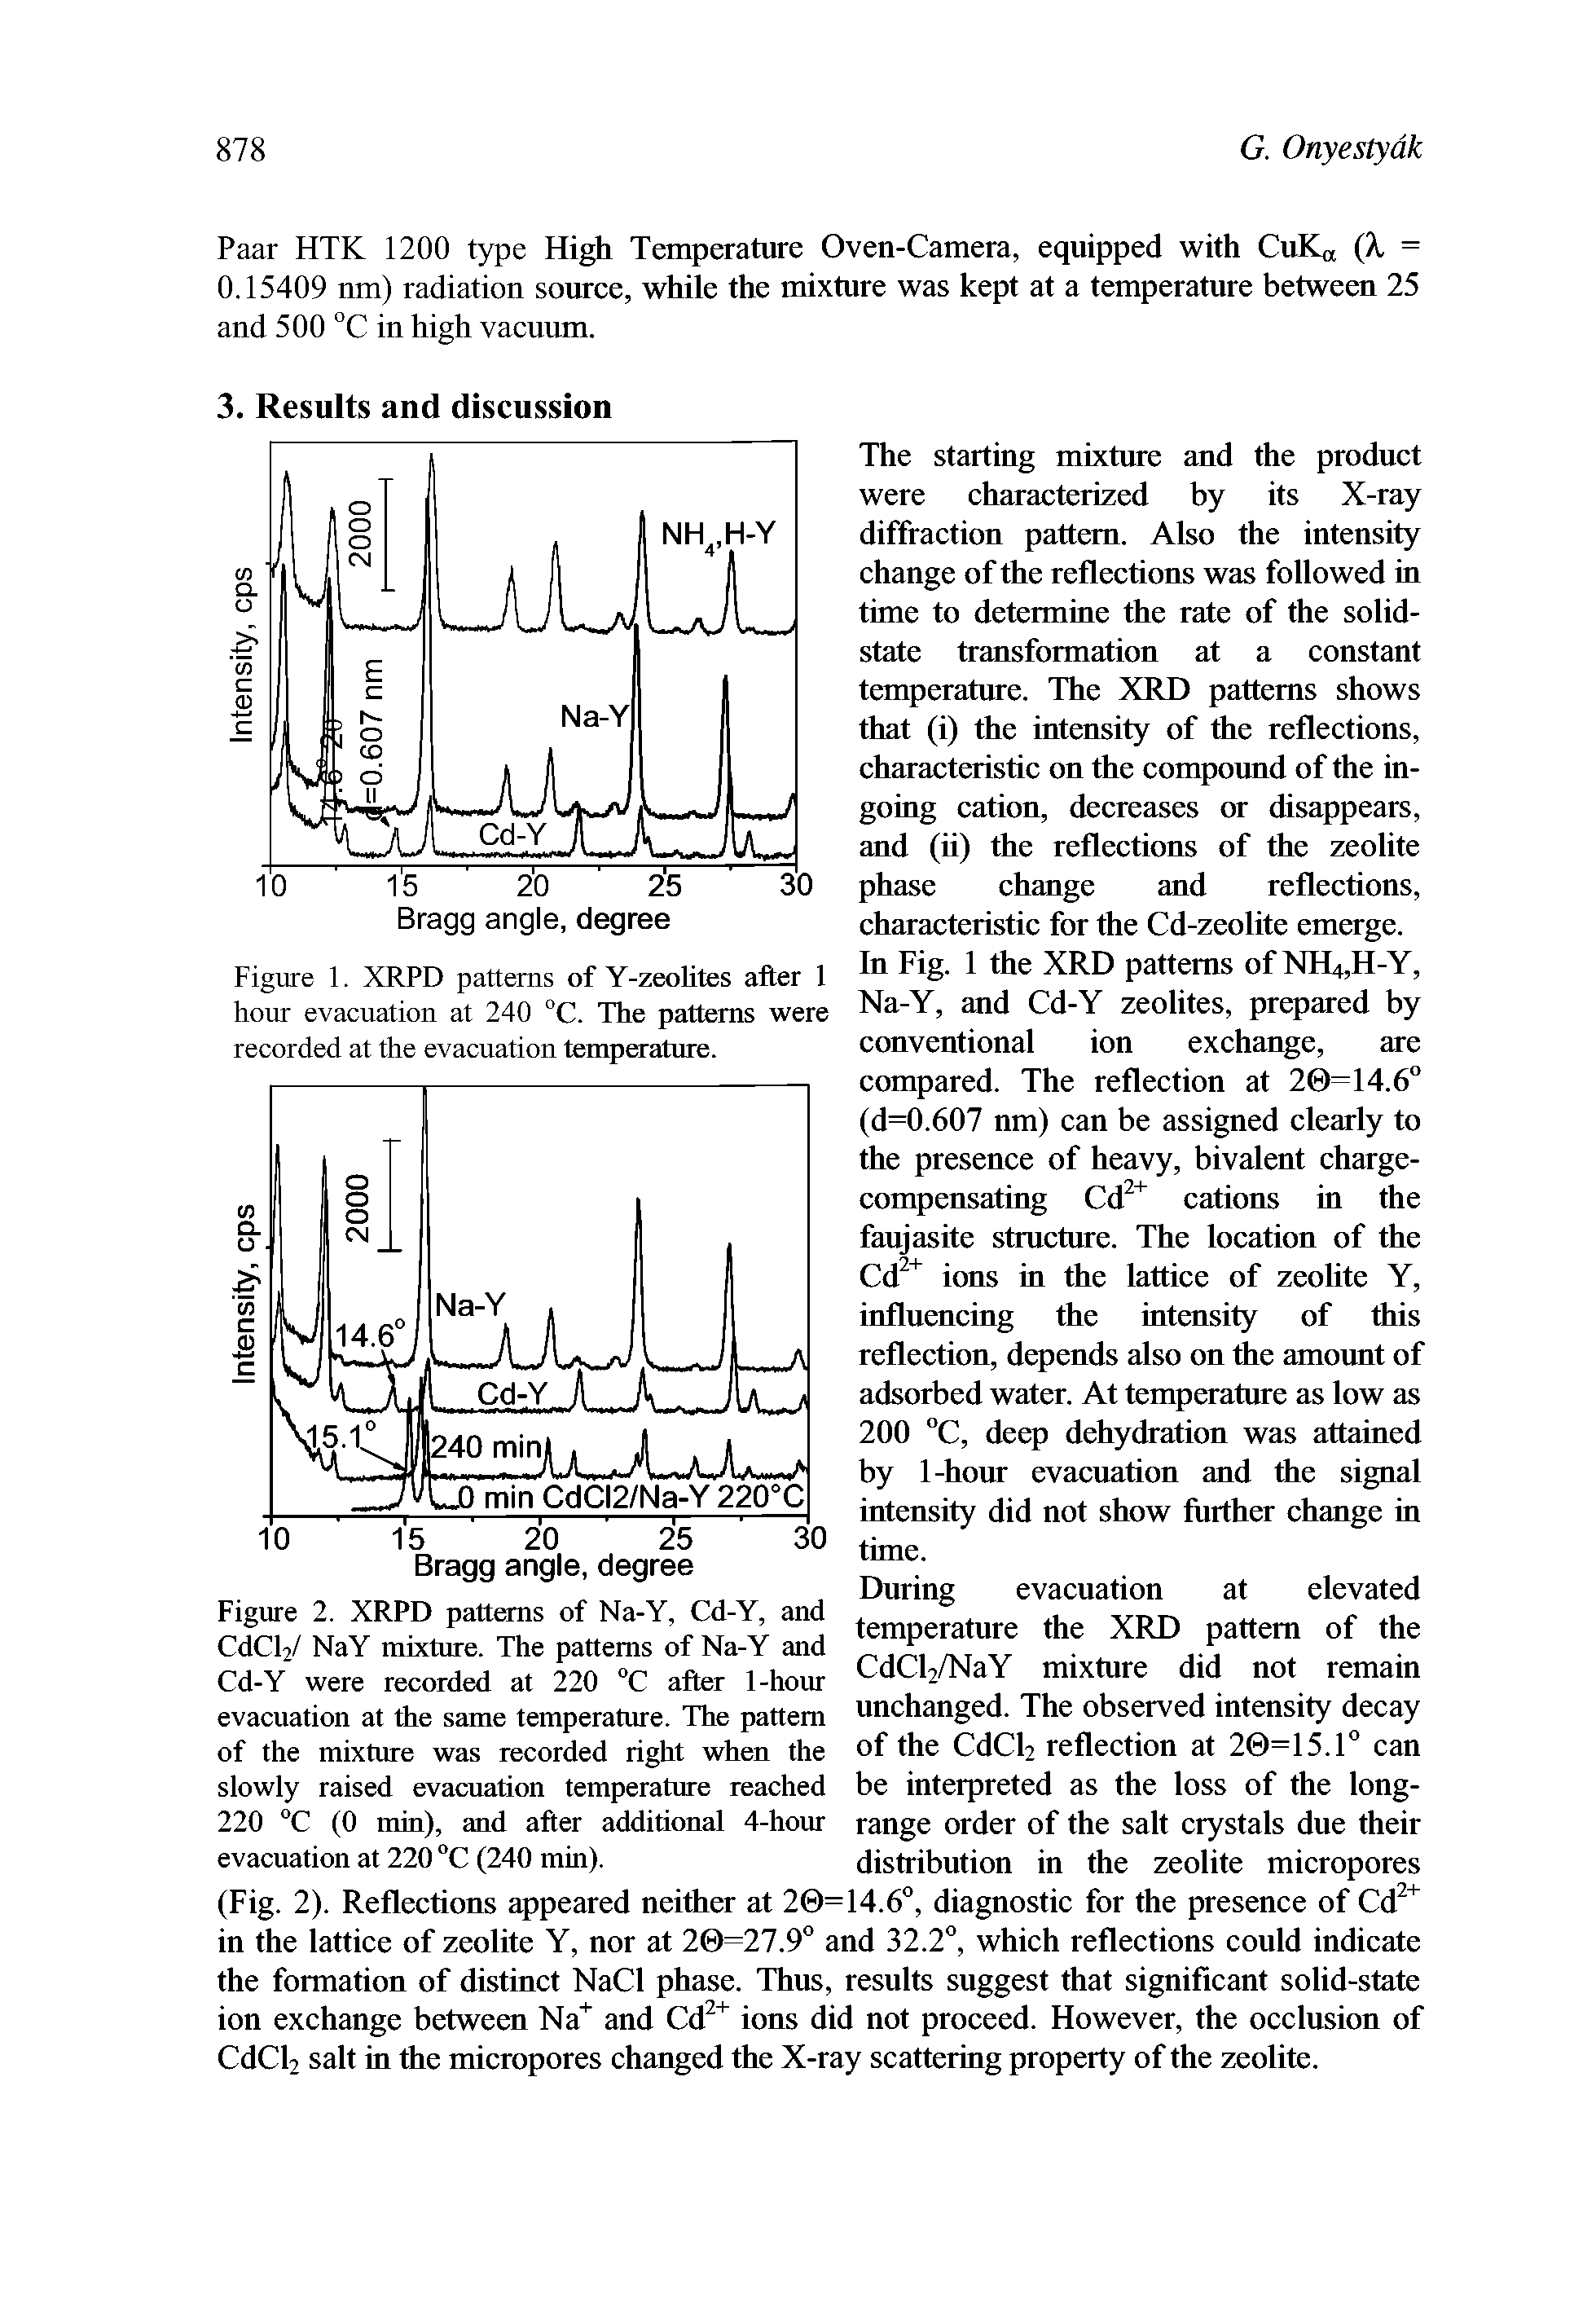 Figure 2. XRPD patterns of Na-Y, Cd-Y, and CdCl2/ NaY mixture. The patterns of Na-Y and Cd-Y were recorded at 220 °C after 1-hour evacuation at the same temperature. The pattern of the mixture was recorded right when the slowly raised evacuation temperature reached 220 °C (0 min), and after additional 4-hour evacuation at 220 °C (240 min).